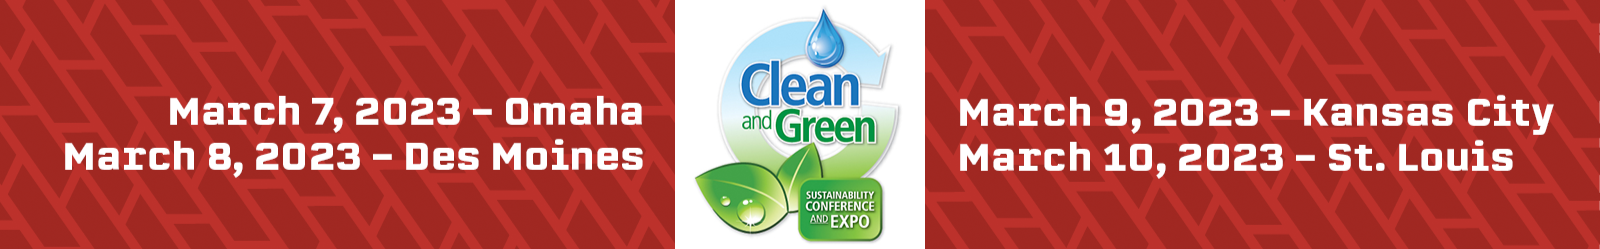 Quick Supply's Clean & Green Sustainability Conference